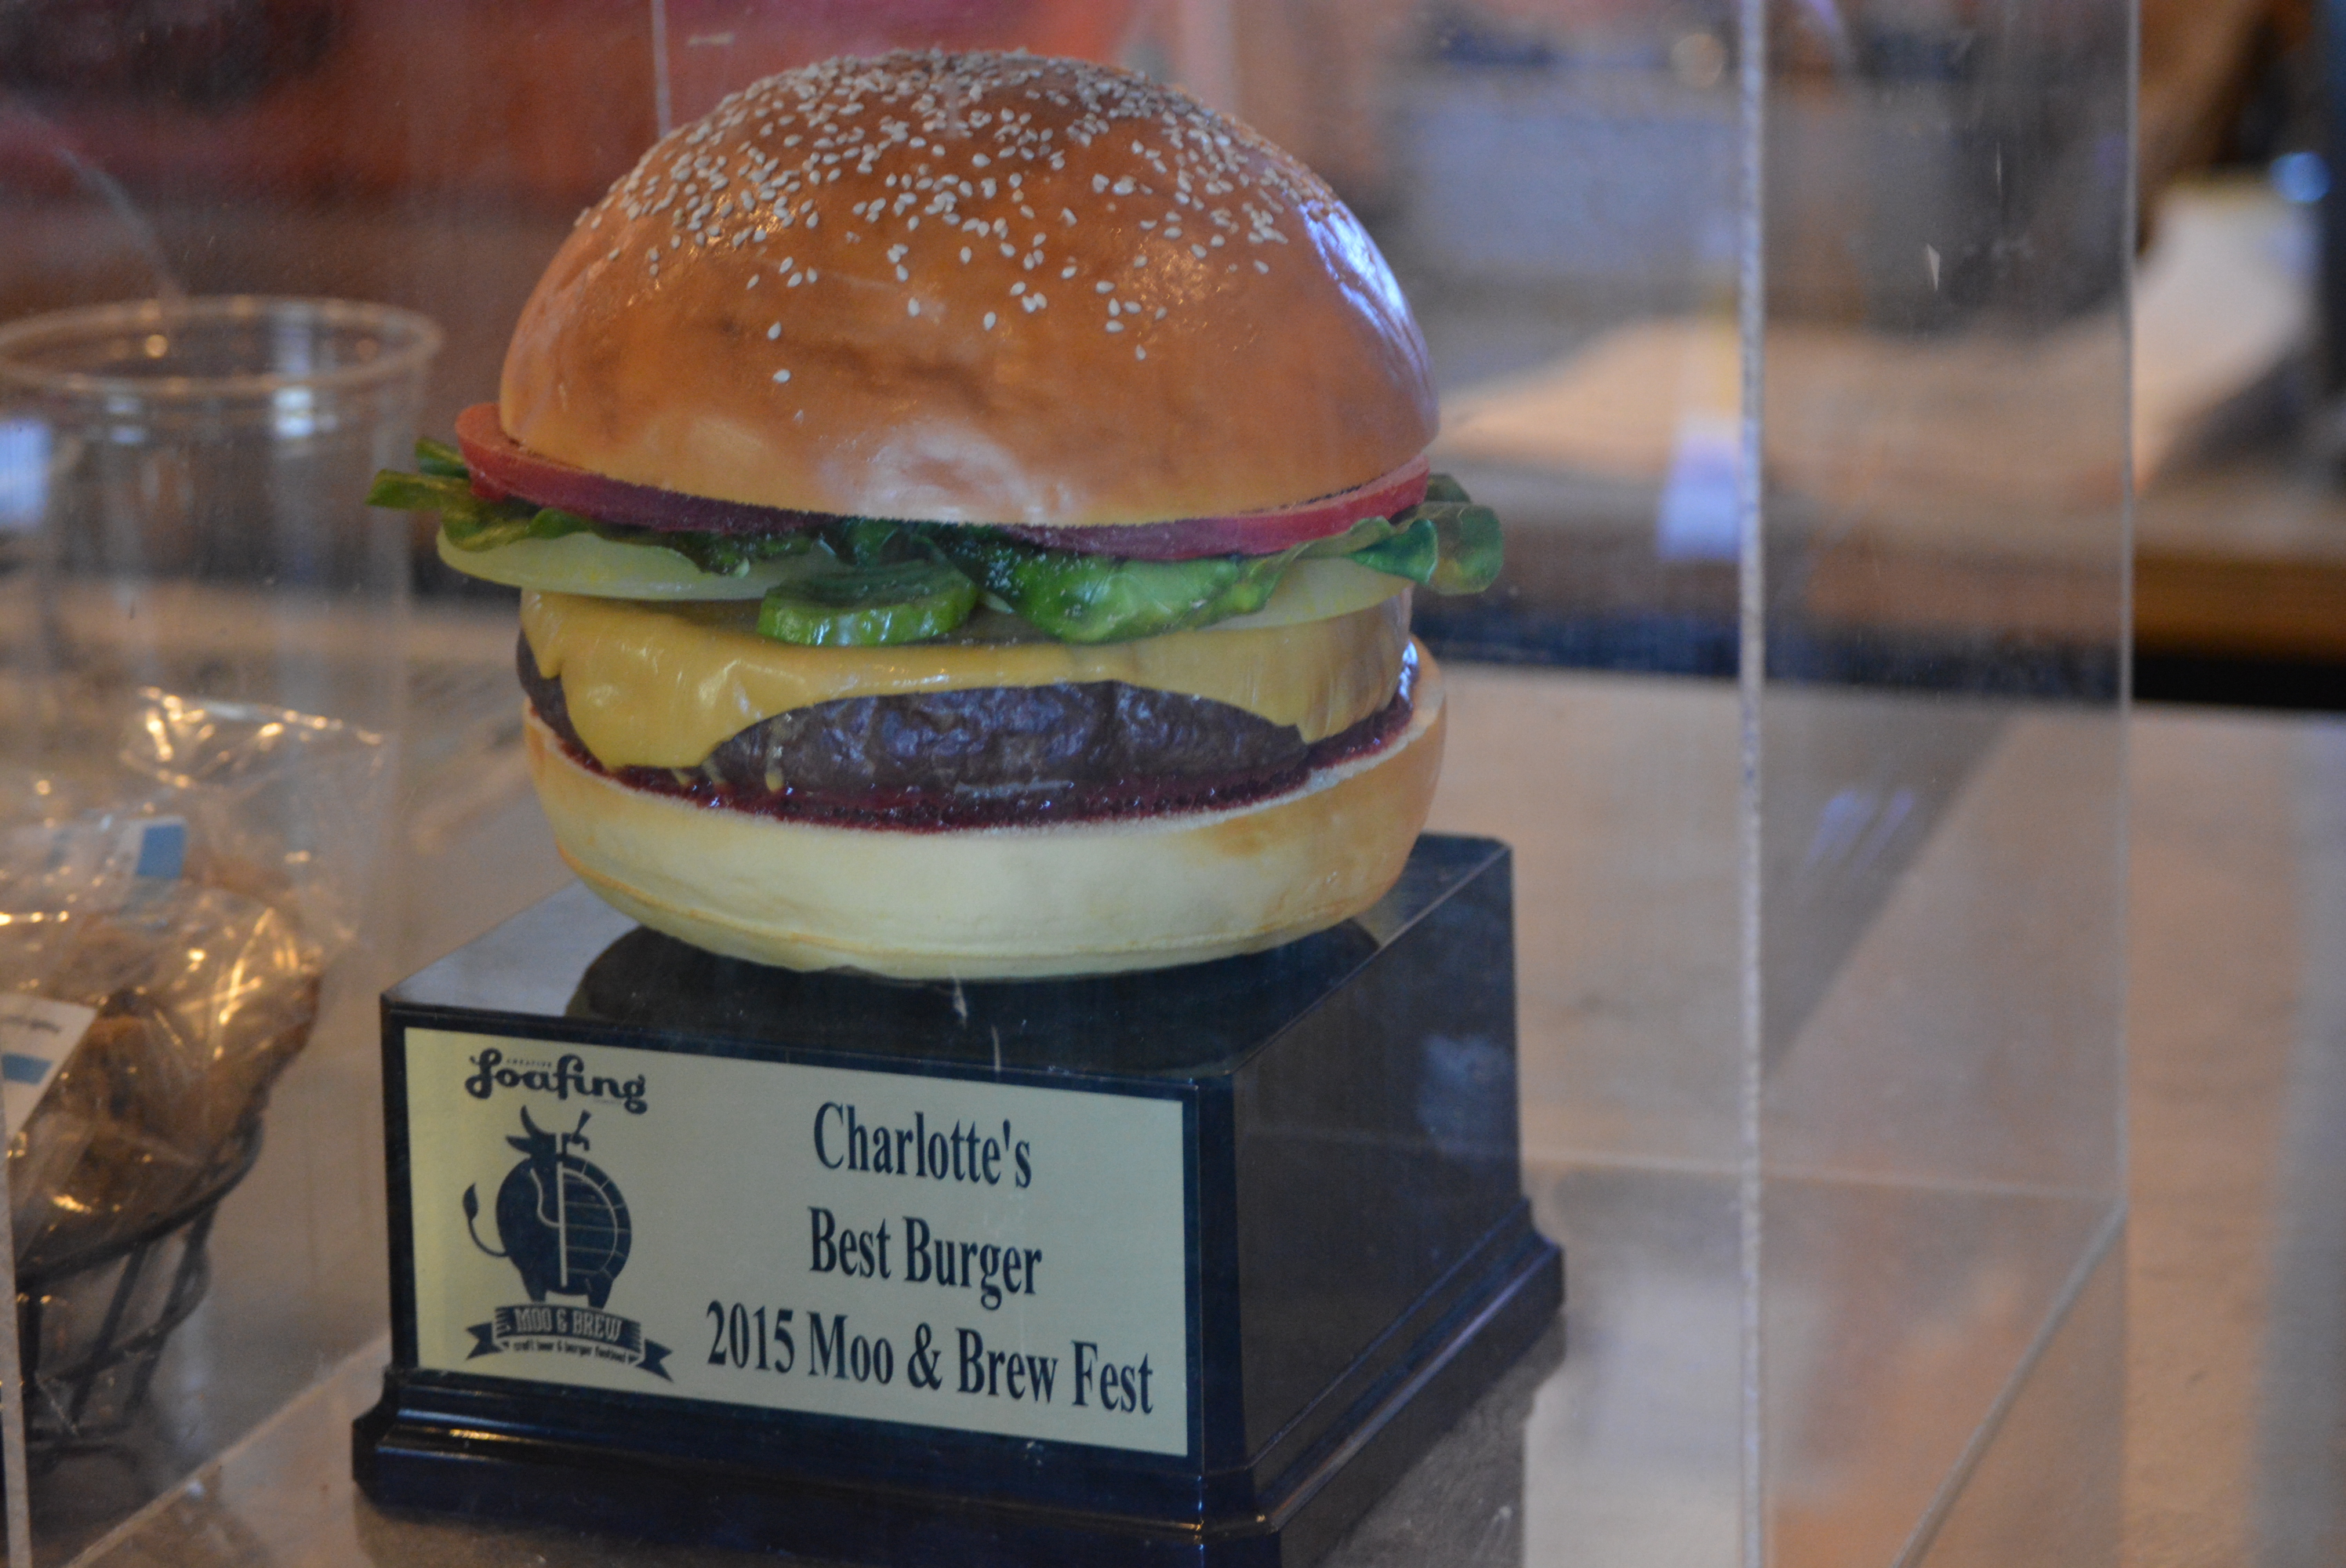 The 2015 Moo & Brew Trophy